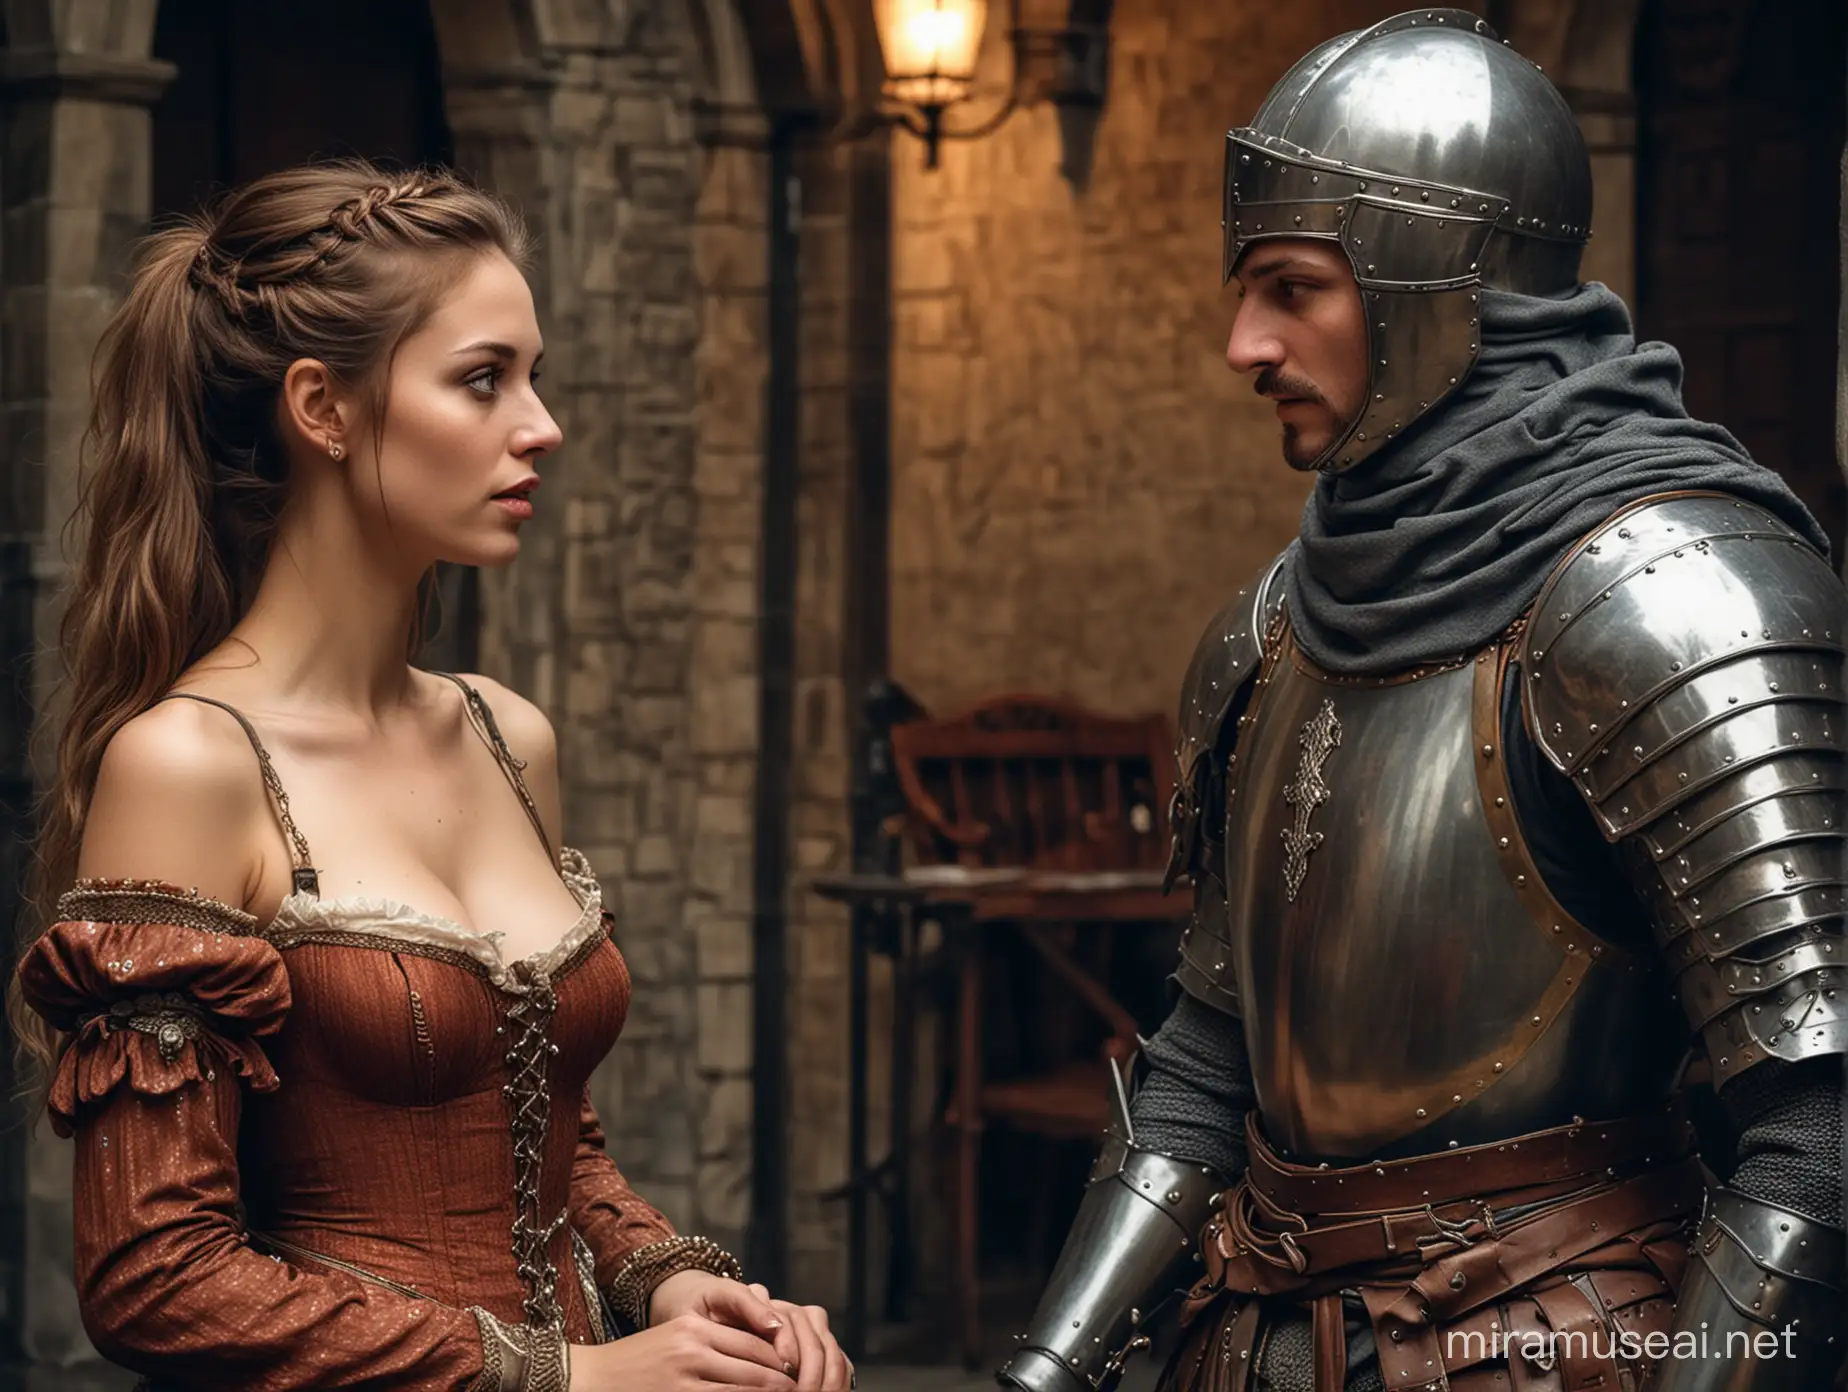 a conversation between a prostitute  and knight.she think thar the knight is just fascinating  merchant
